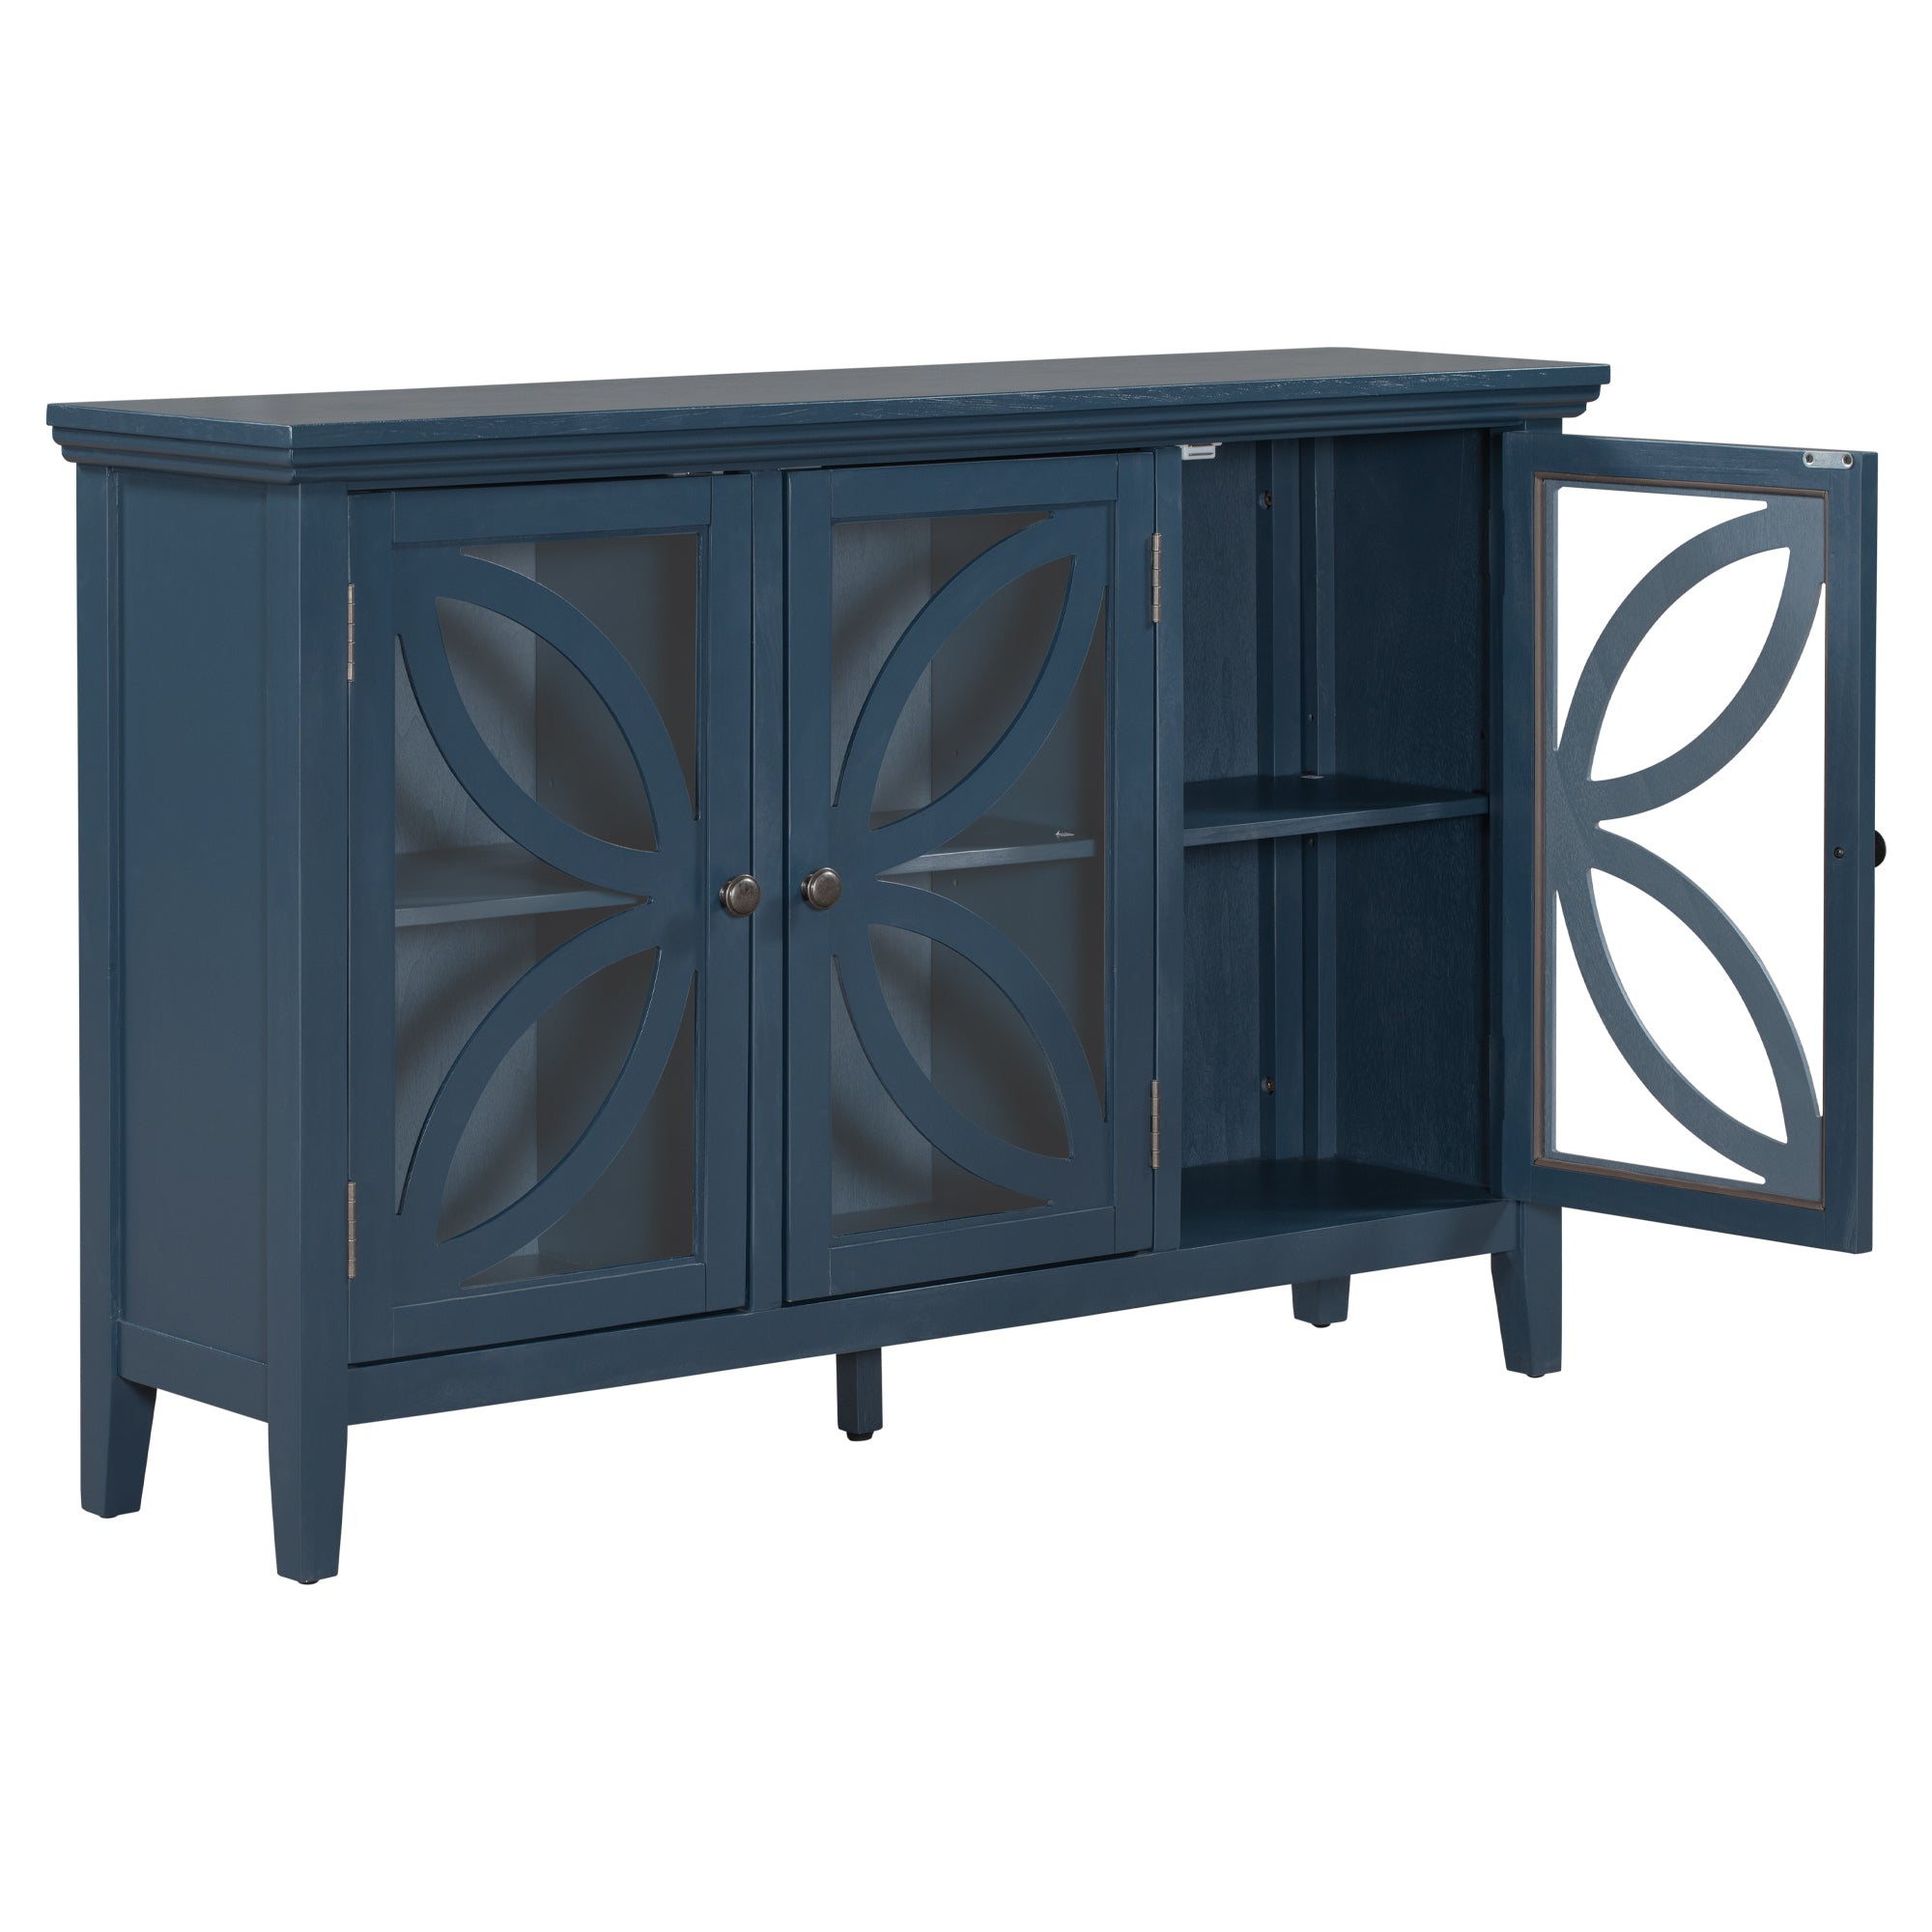 Accent Storage Cabinet Wooden Cabinet with Adjustable Shelf, Modern Sideboard for Entryway (Blue)